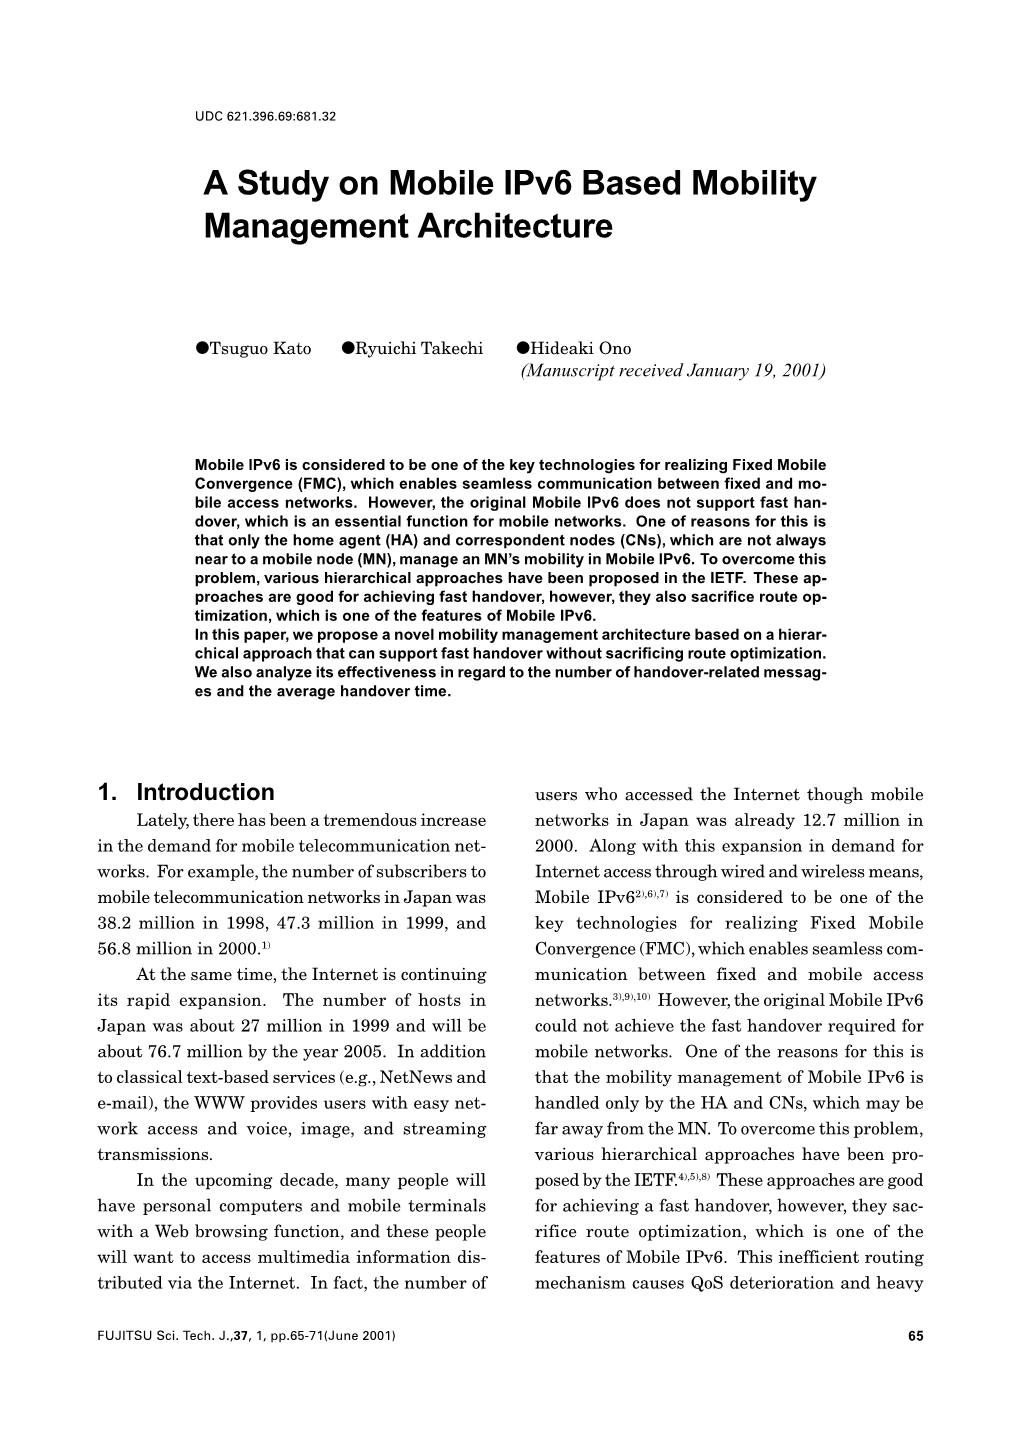 A Study on Mobile Ipv6 Based Mobility Management Architecture